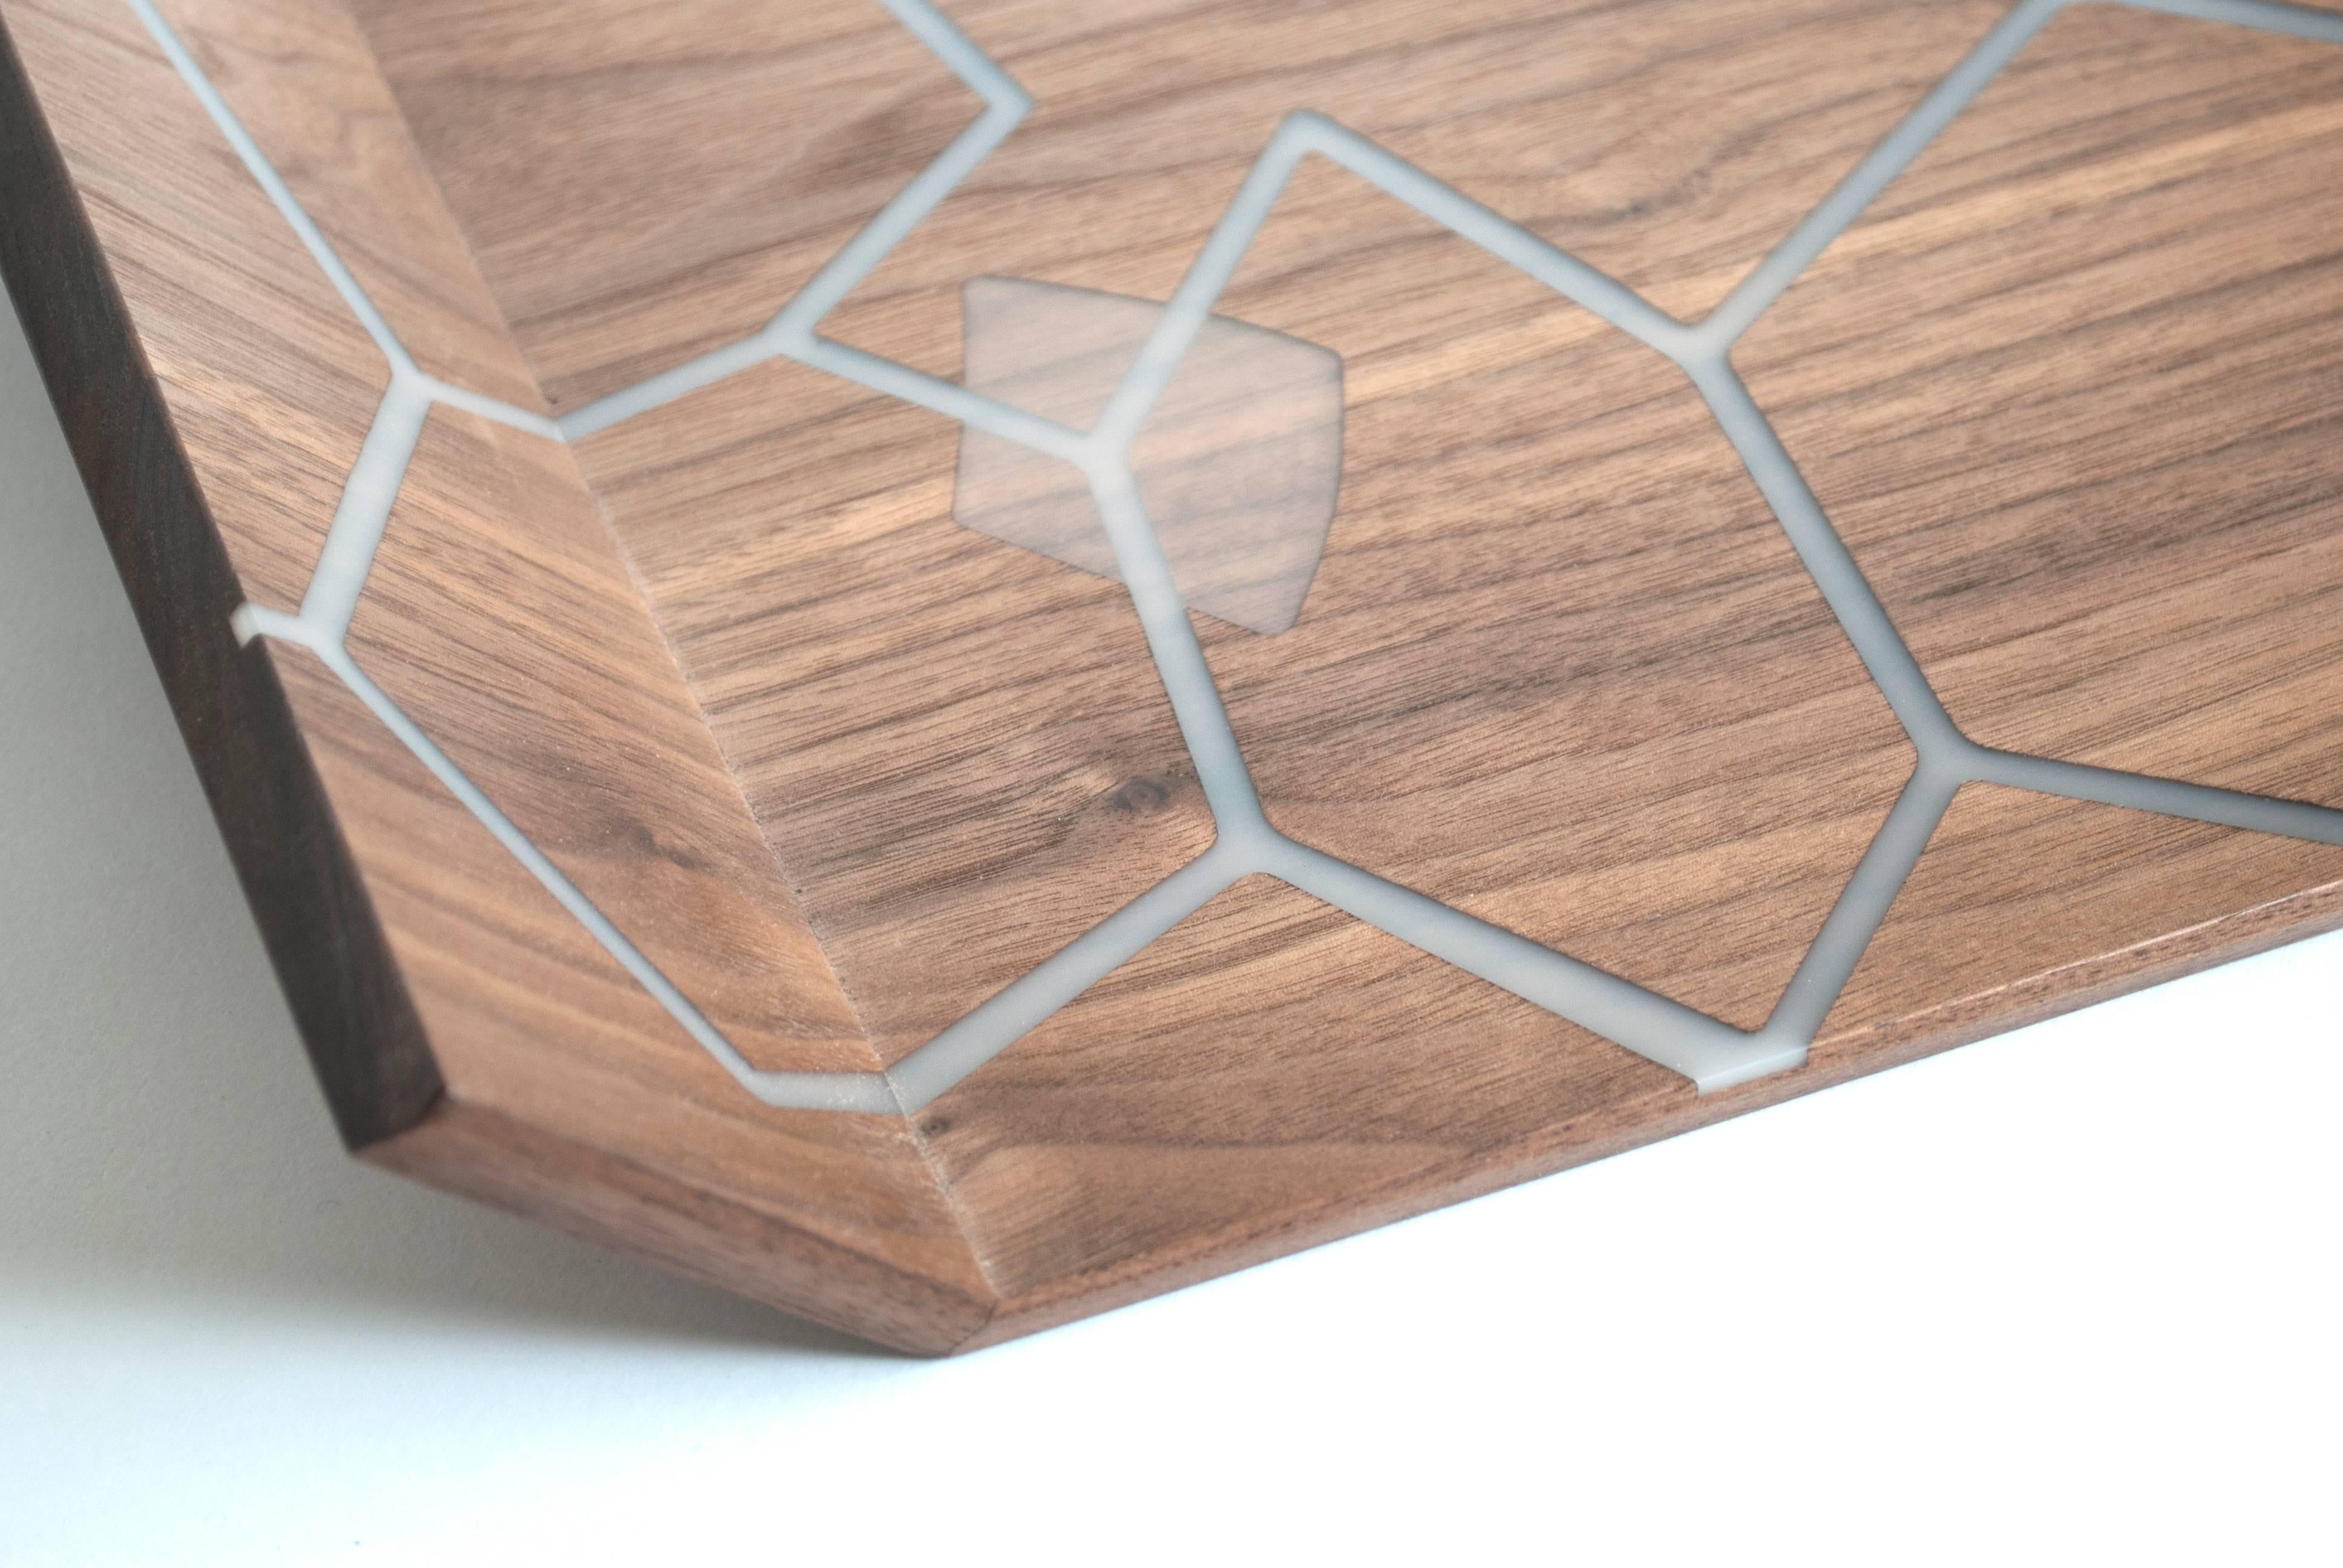 Carved Honeycomb Decorative Serving Tray in Walnut with Inlaid Resin - In Stock